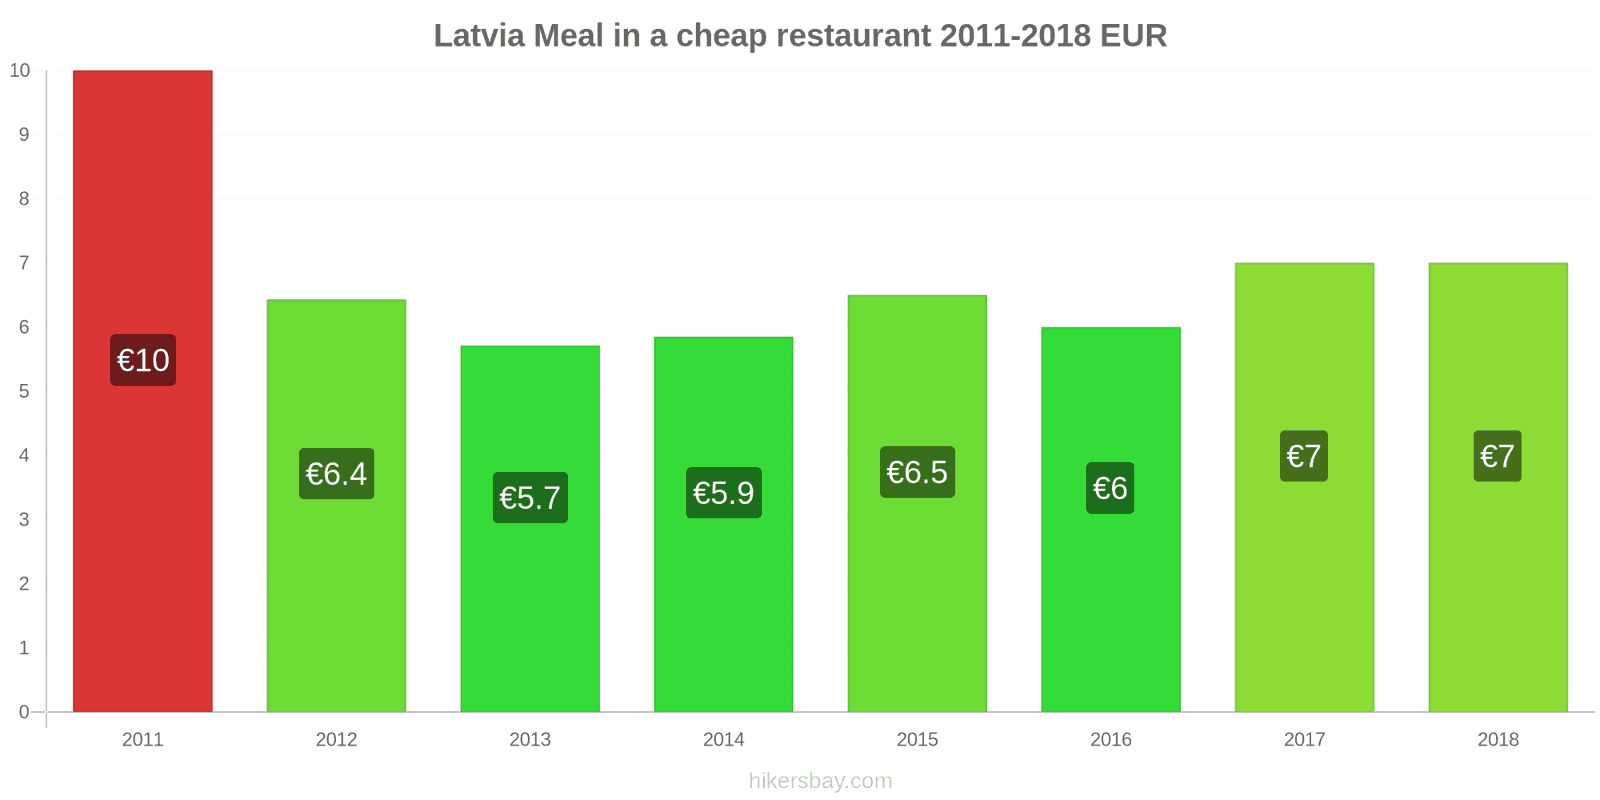 Latvia price changes Meal in a cheap restaurant hikersbay.com